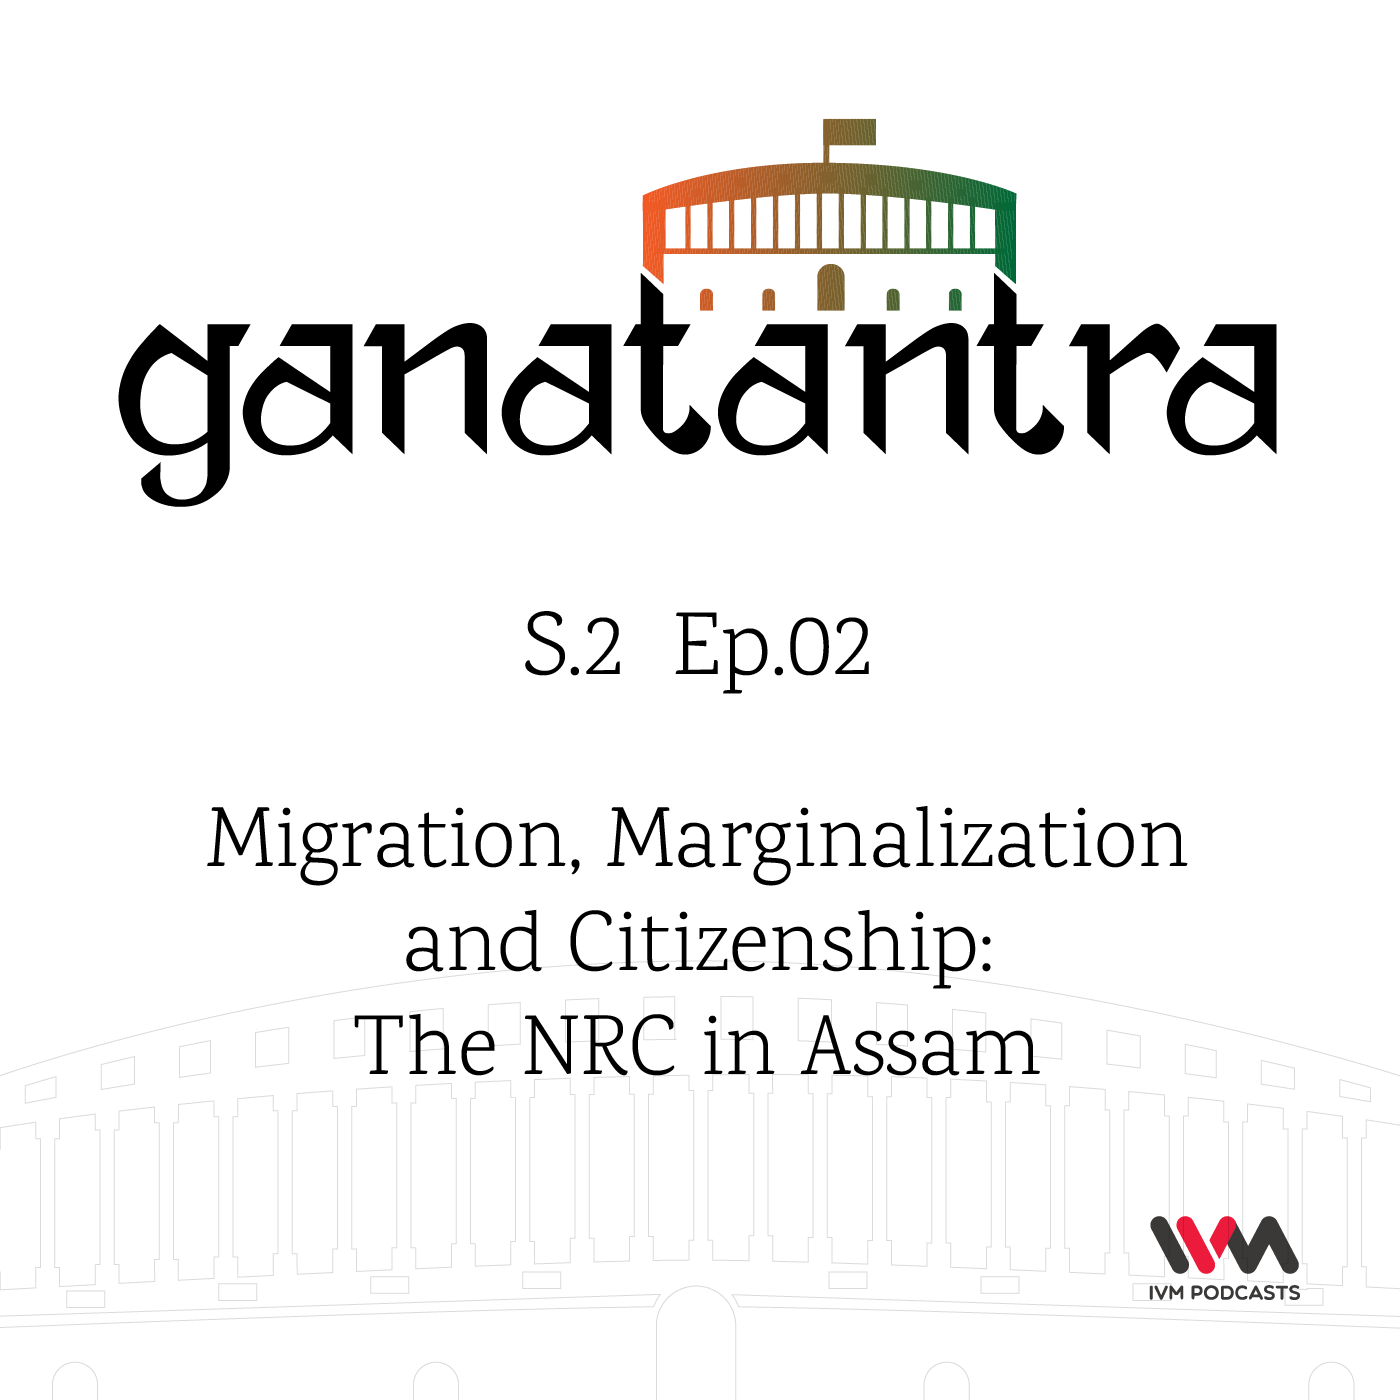 S02 E02: Migration, Marginalization and Citizenship: The NRC in Assam